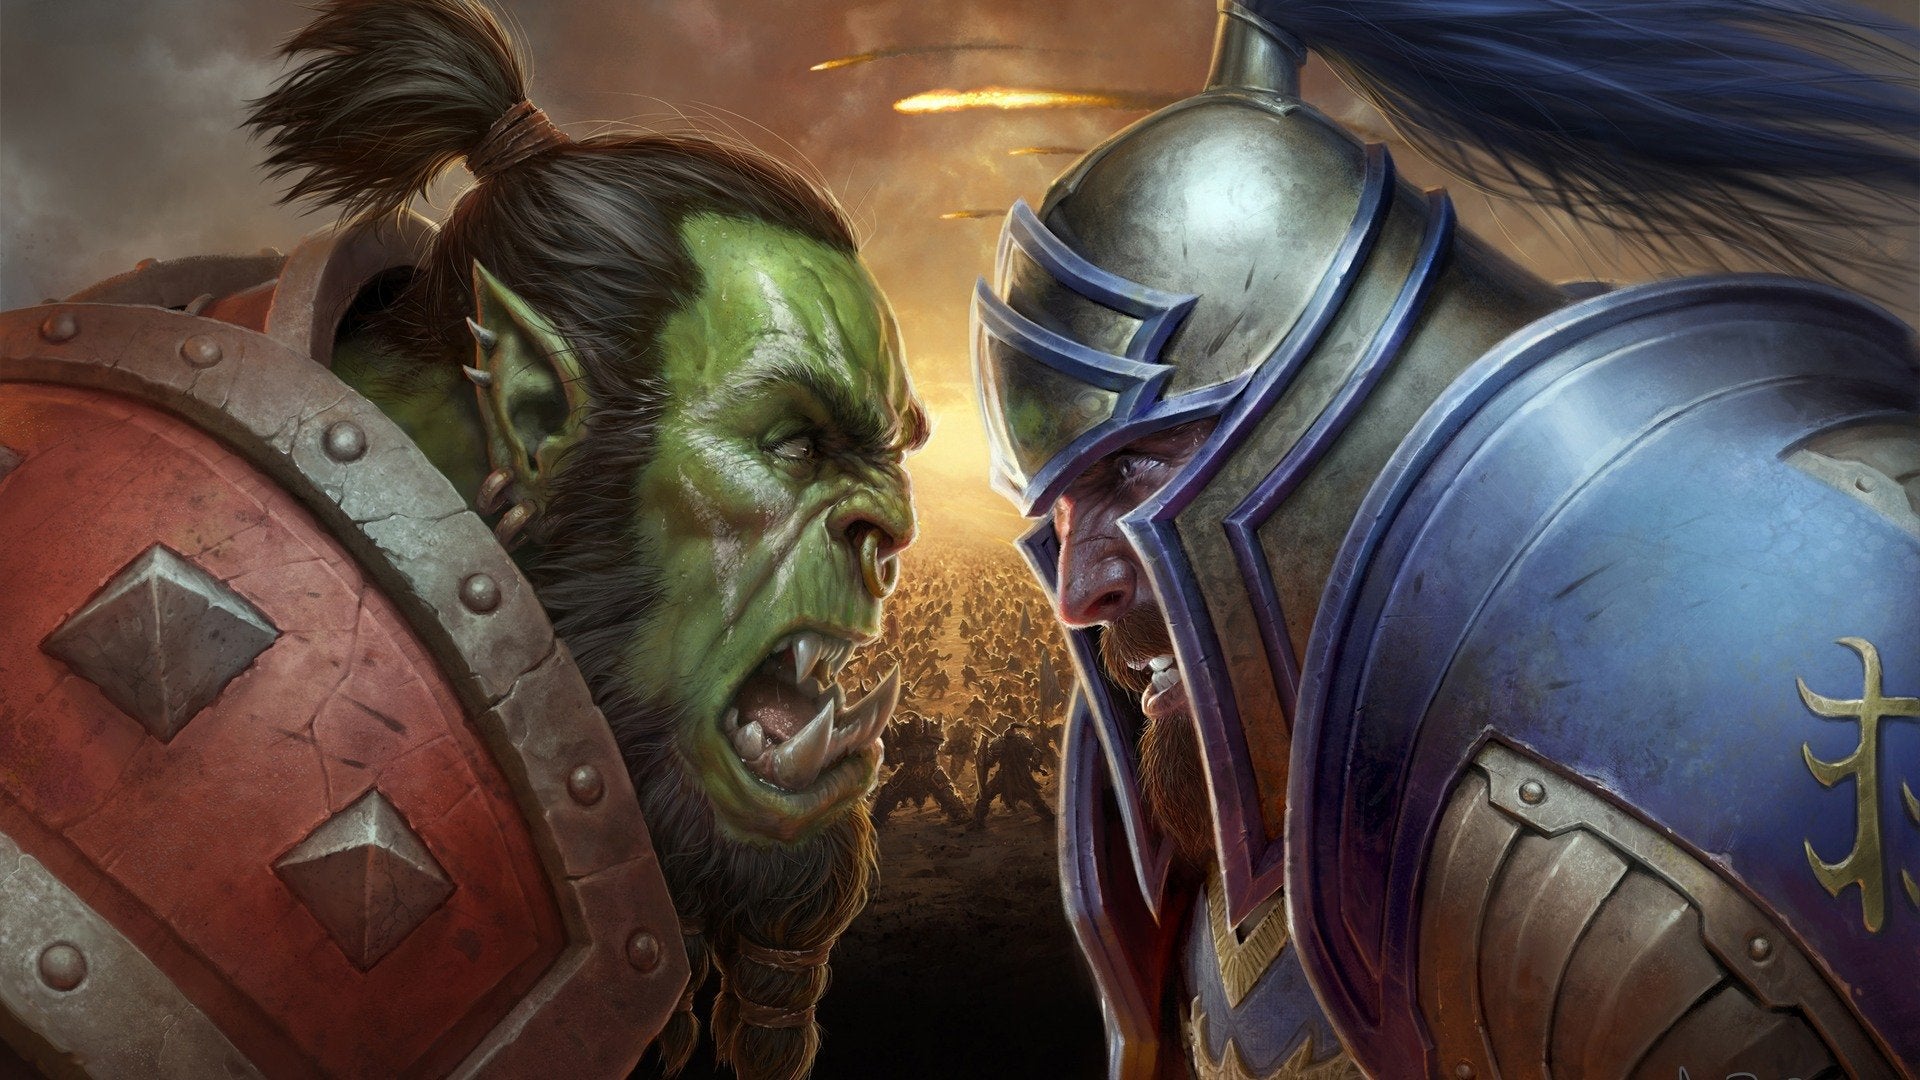 The Horde Orc leader to the left and the Human Alliance leader to the right.